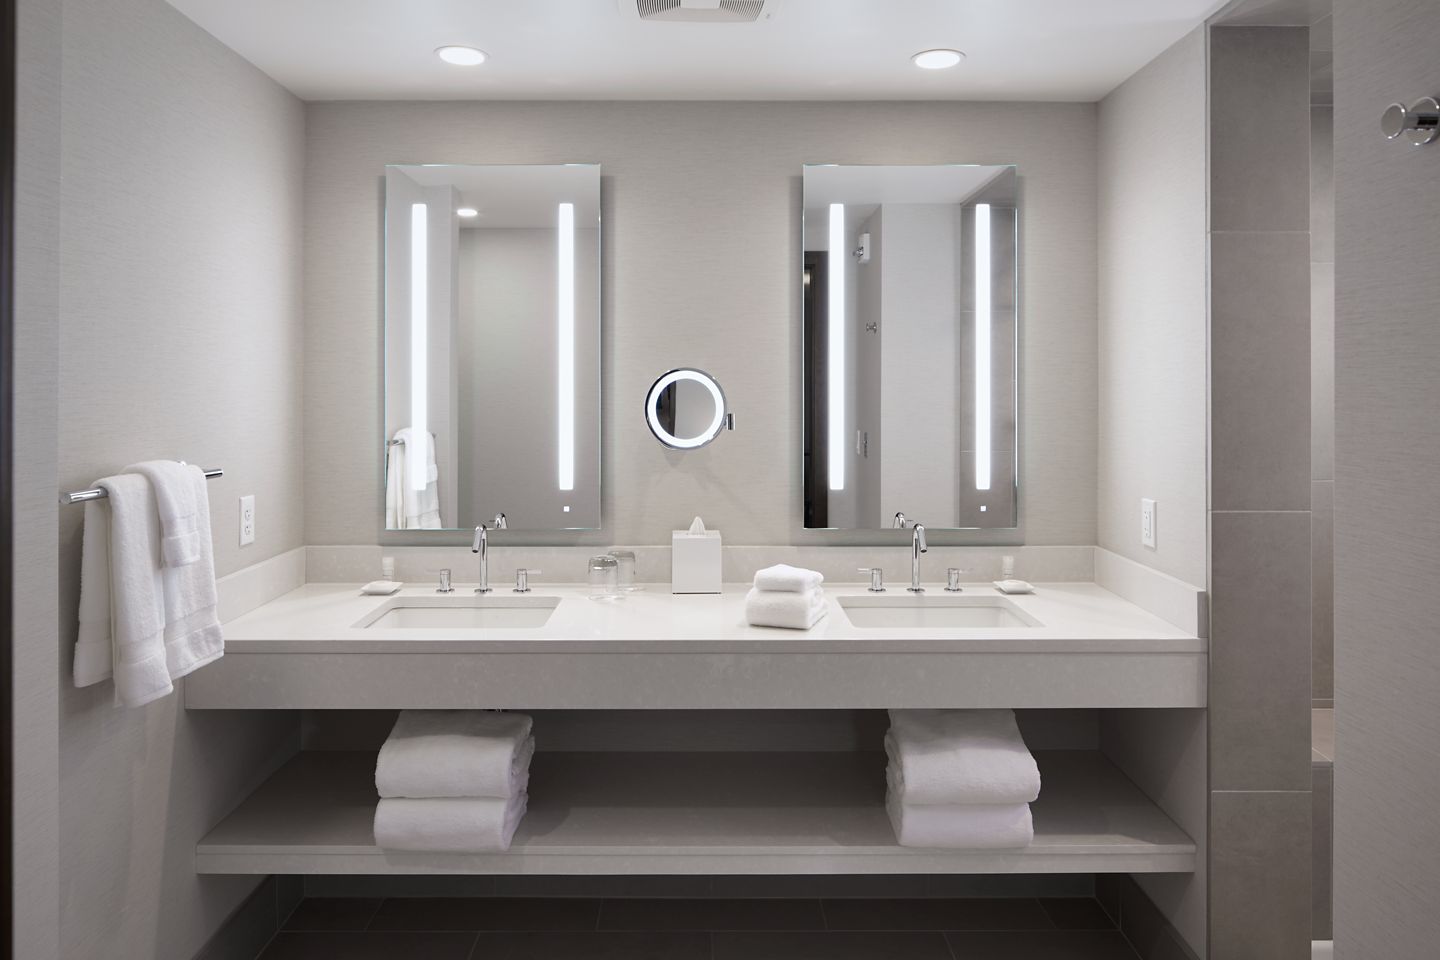 Inside the well-lit bathroom with double vanities at the Inn on Woodlake